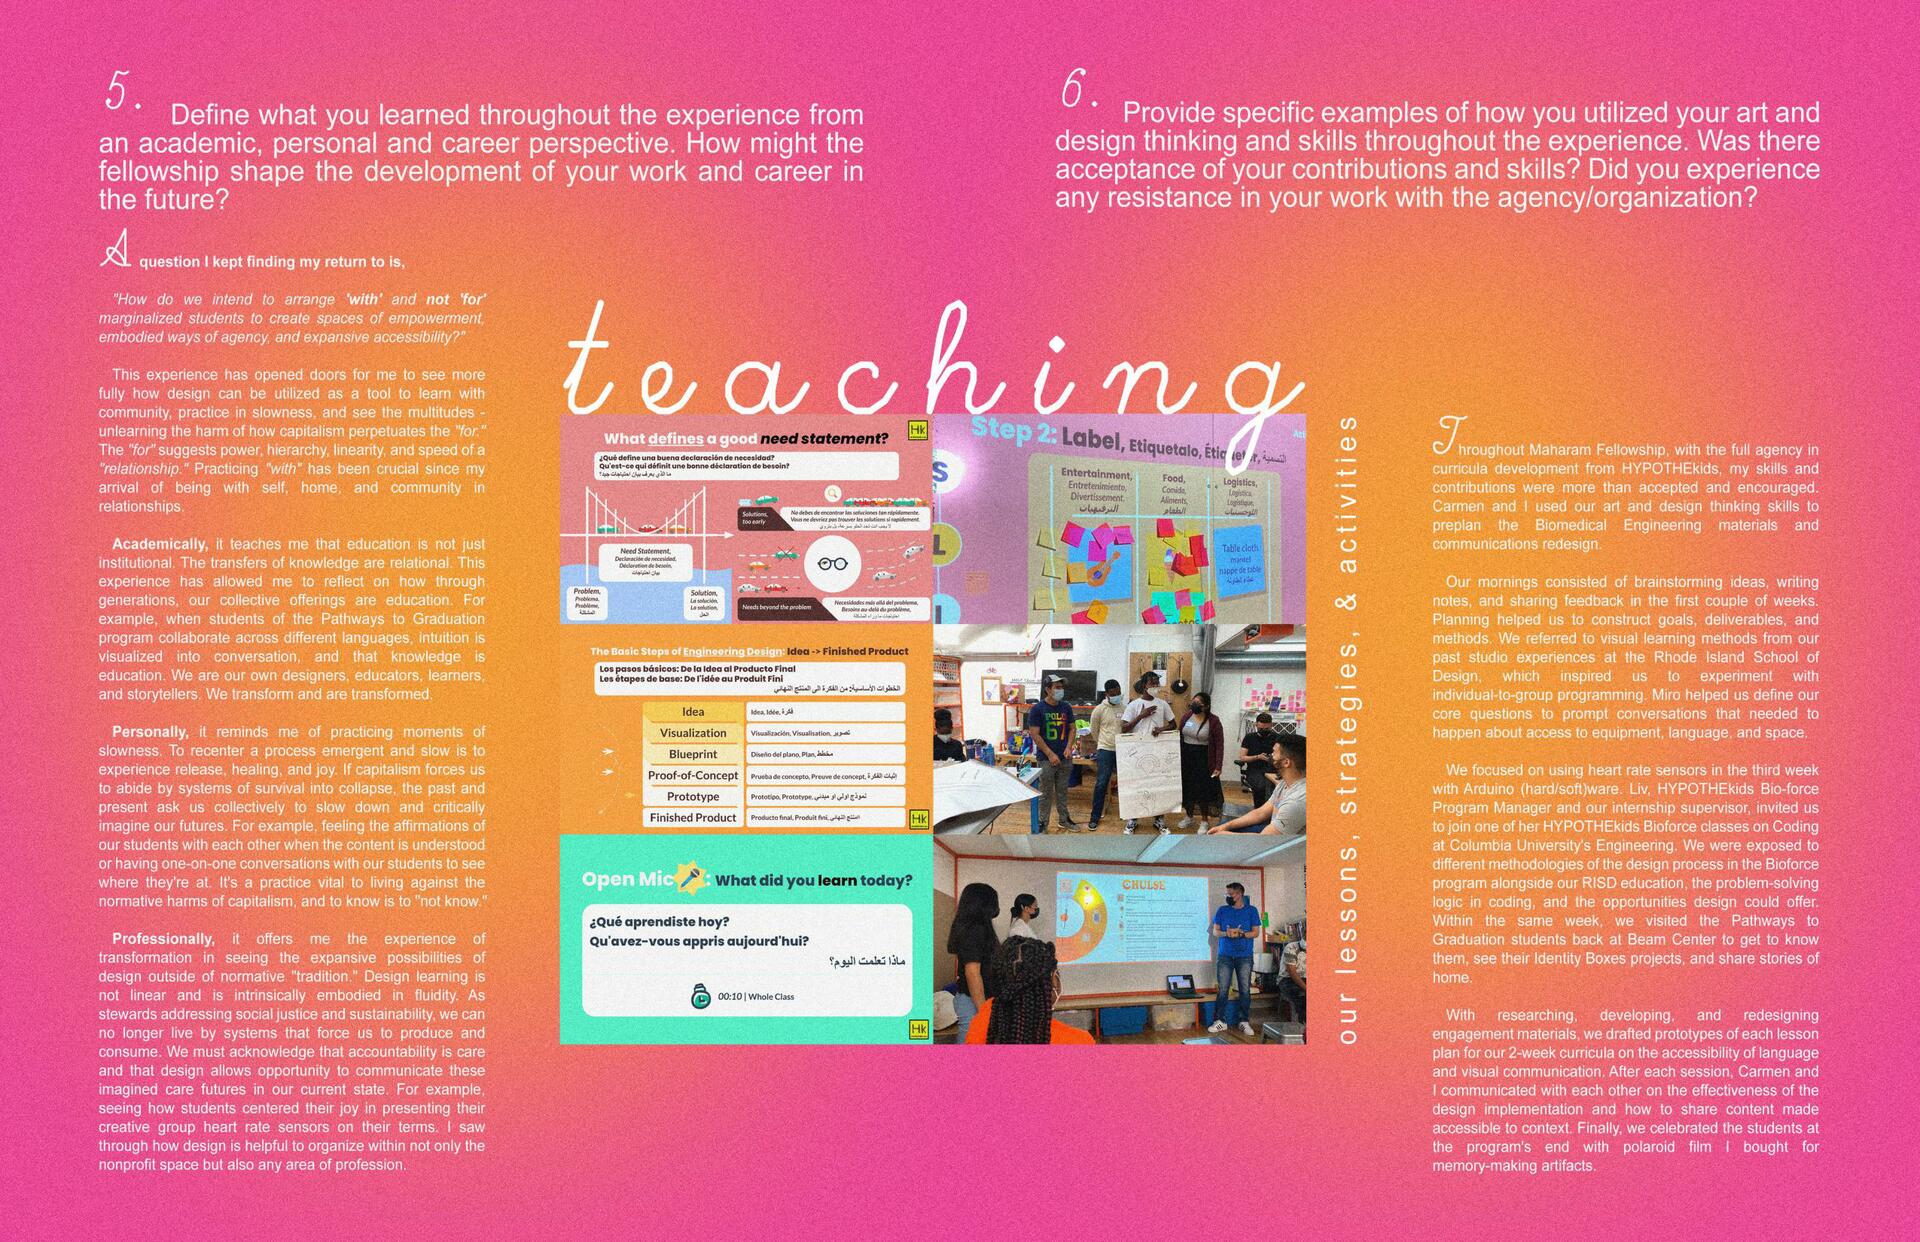 Gradient orange-to-pink page with centered images depicting students collaborating on design tasks in Beam Center's studio setting. Text and diagrams are visible around the images. Title reads "teaching" with subheading "our lessons, strategies, and activities".